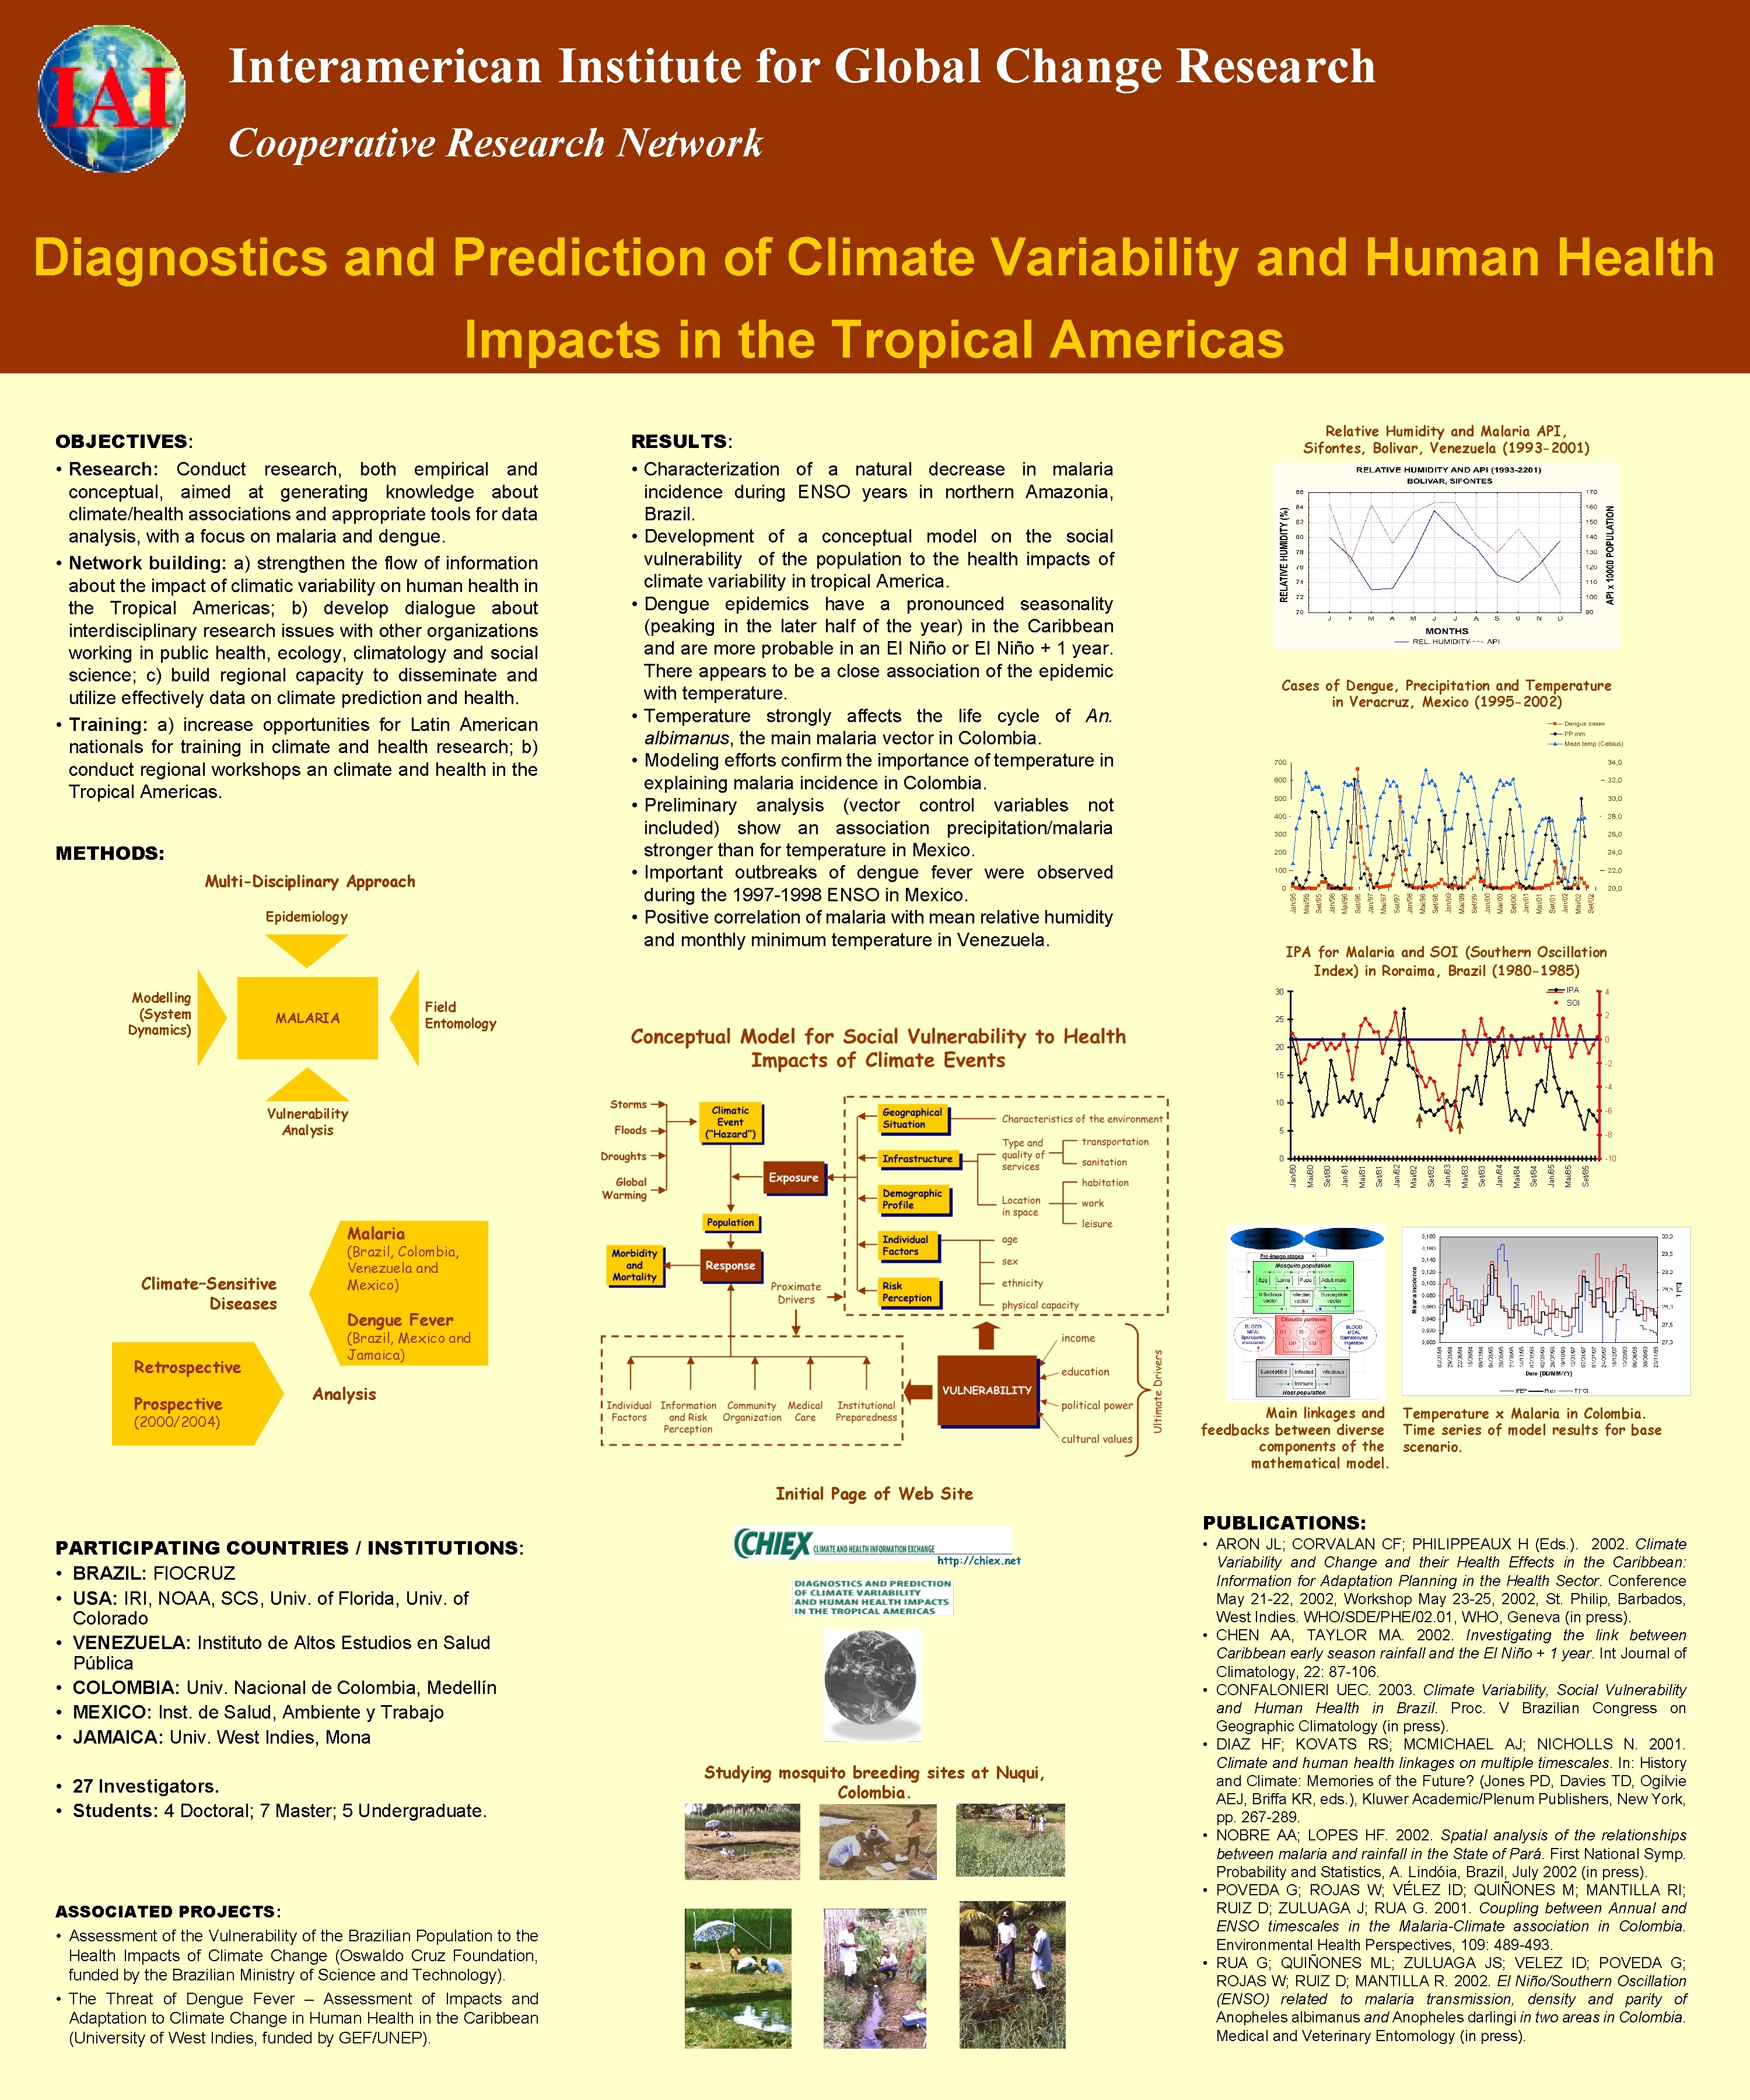 Interamerican Institute for Global Change Research Cooperative Research Network Diagnostics and Prediction of Climate